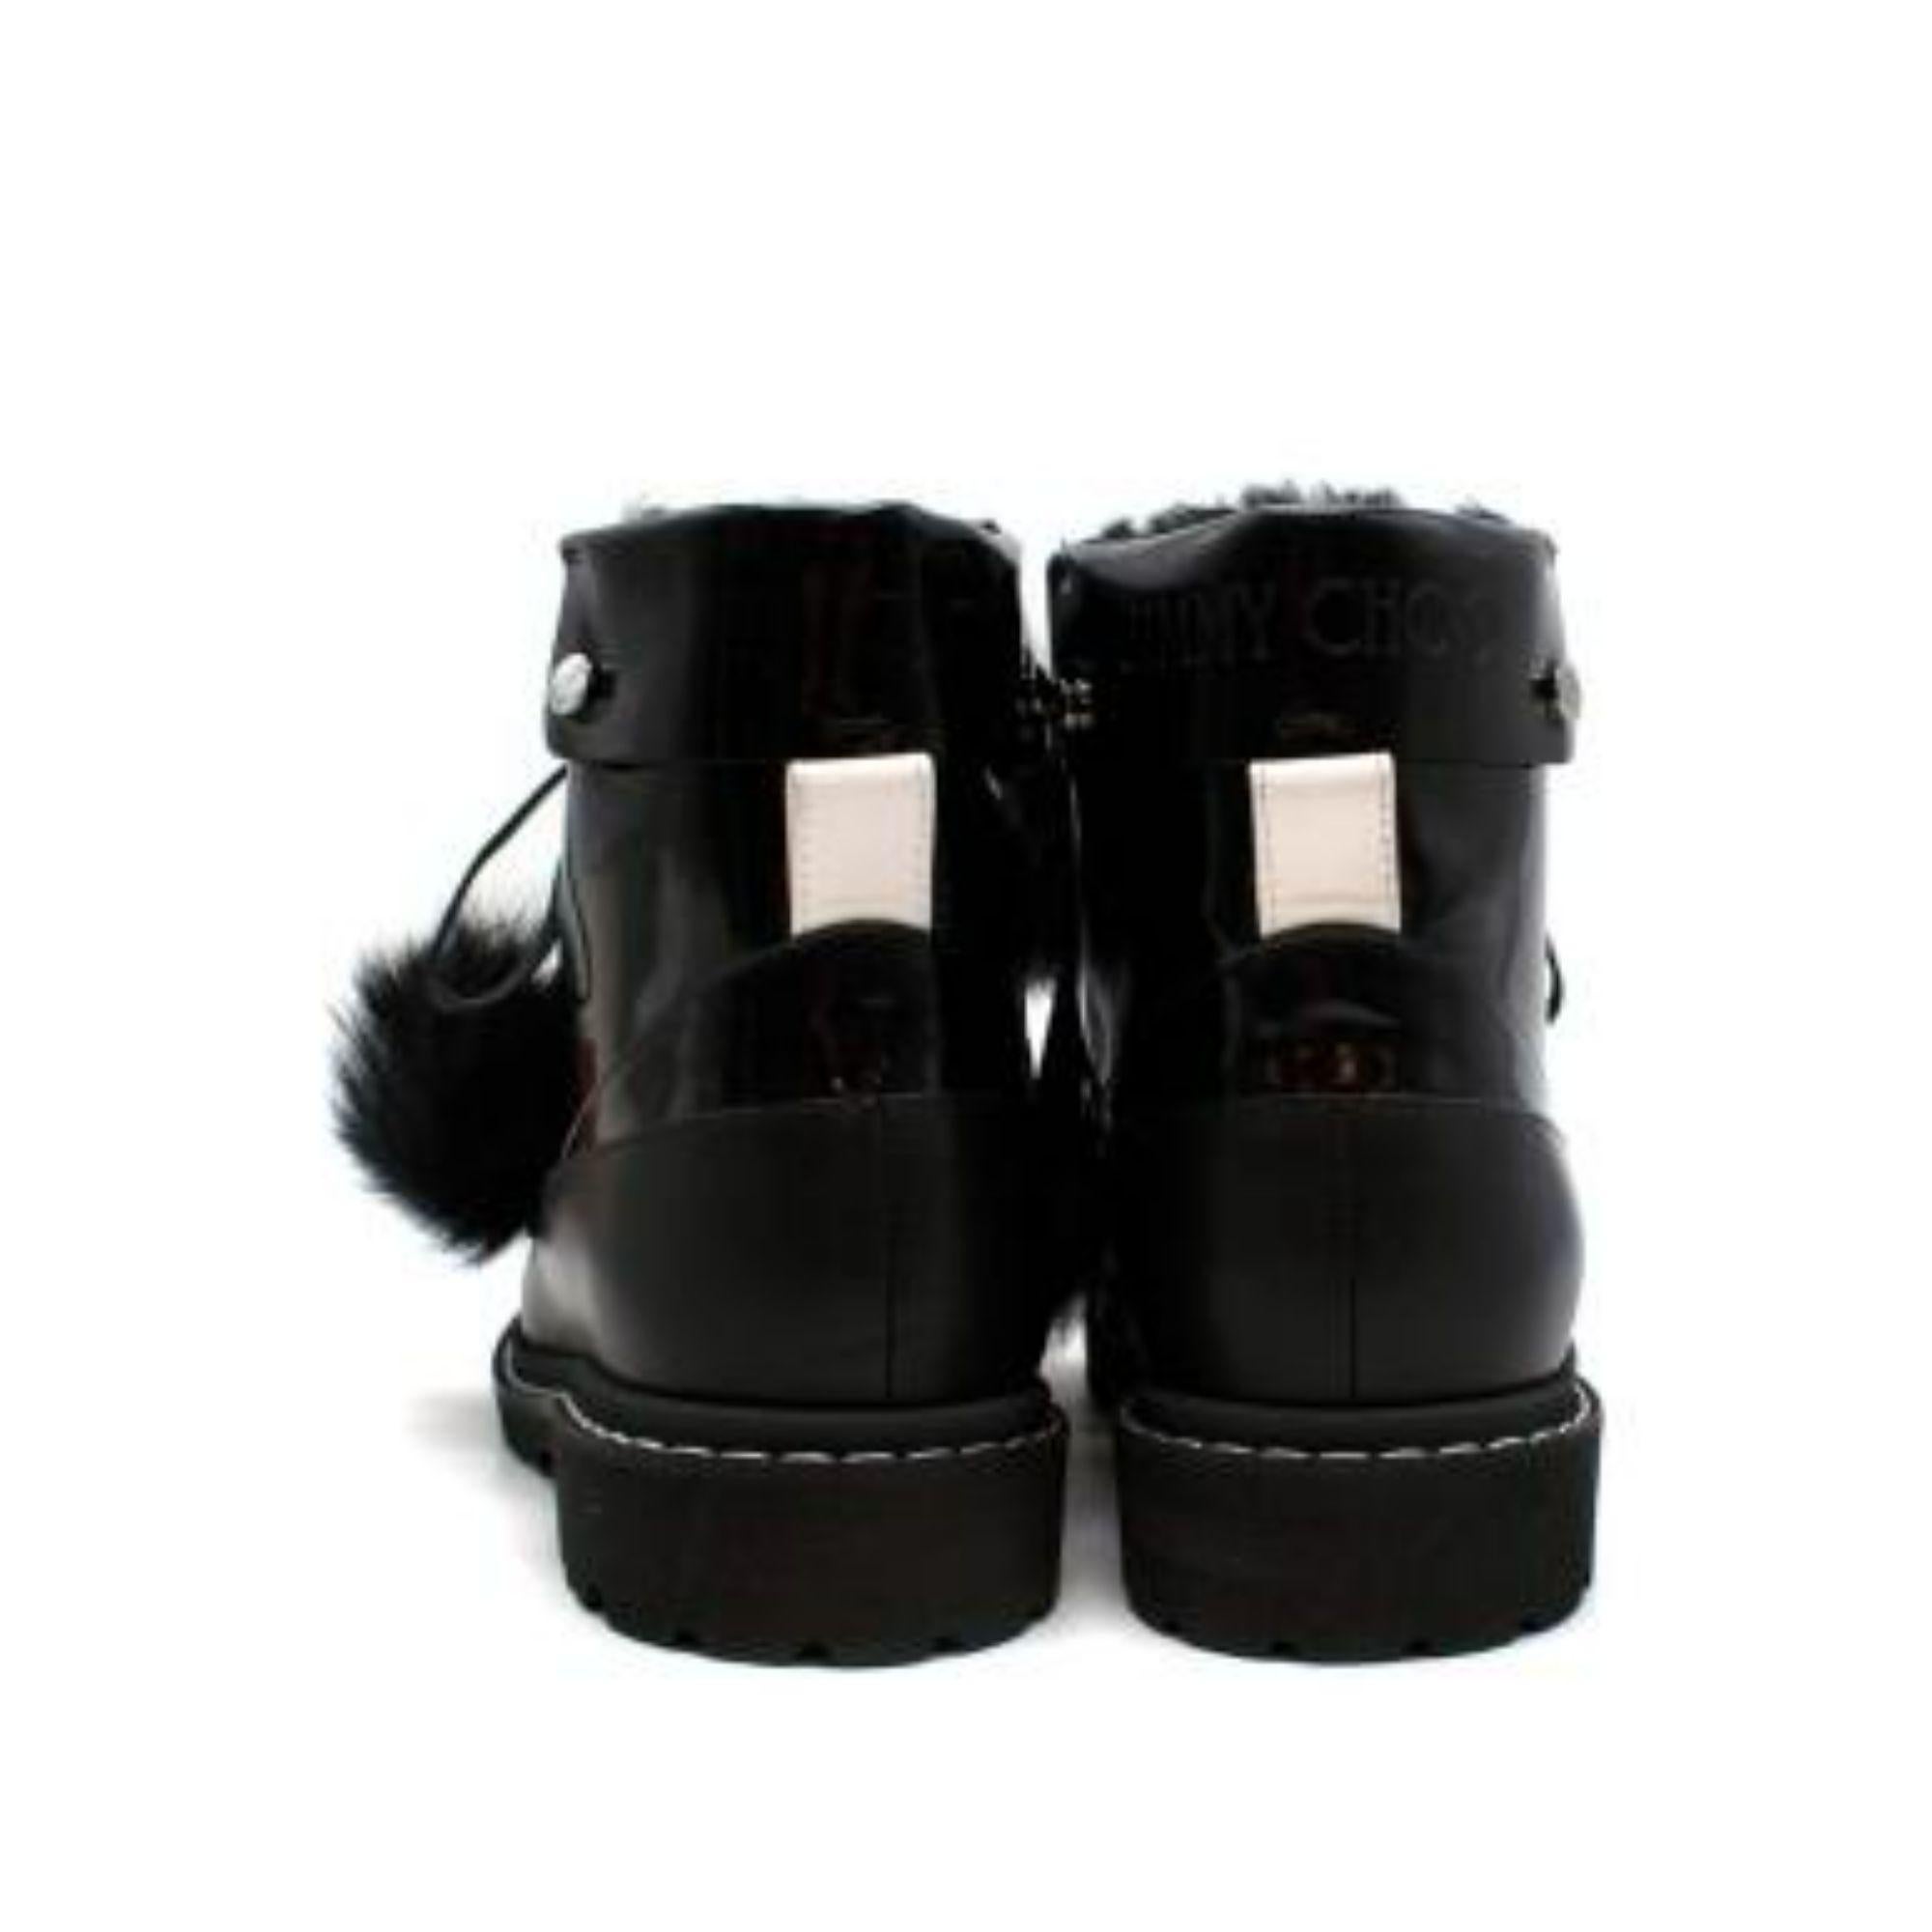 Jimmy Choo Self Heating Voyager Ankle Boots In Excellent Condition For Sale In London, GB